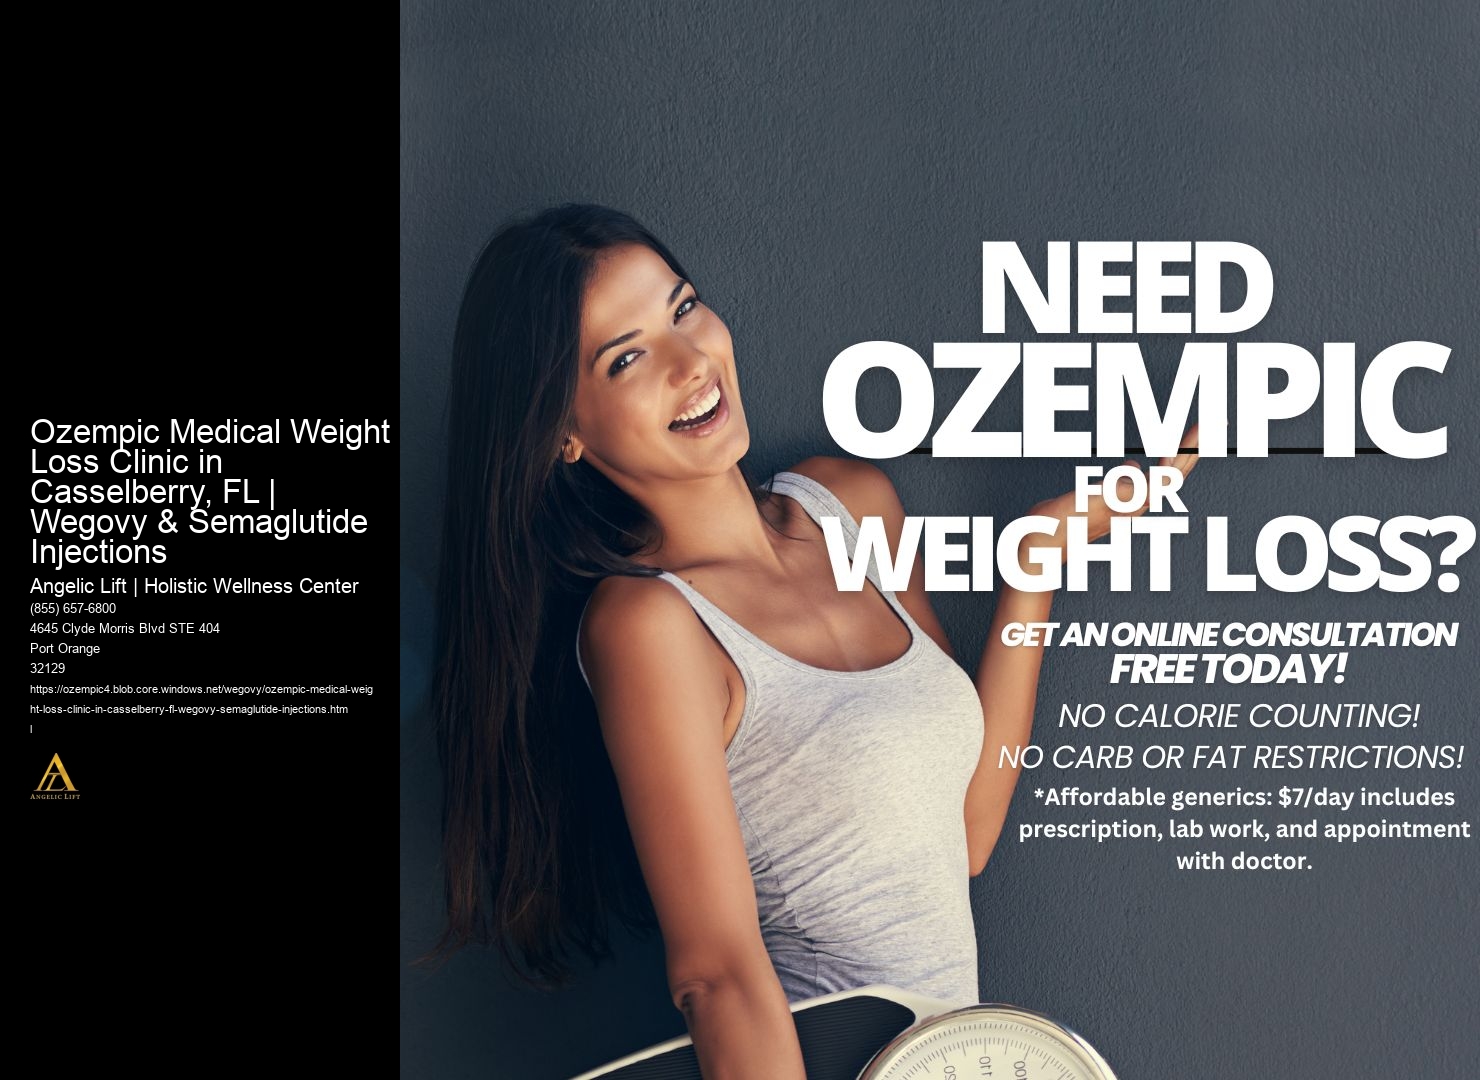 Ozempic Medical Weight Loss Clinic in Casselberry, FL | Wegovy & Semaglutide Injections